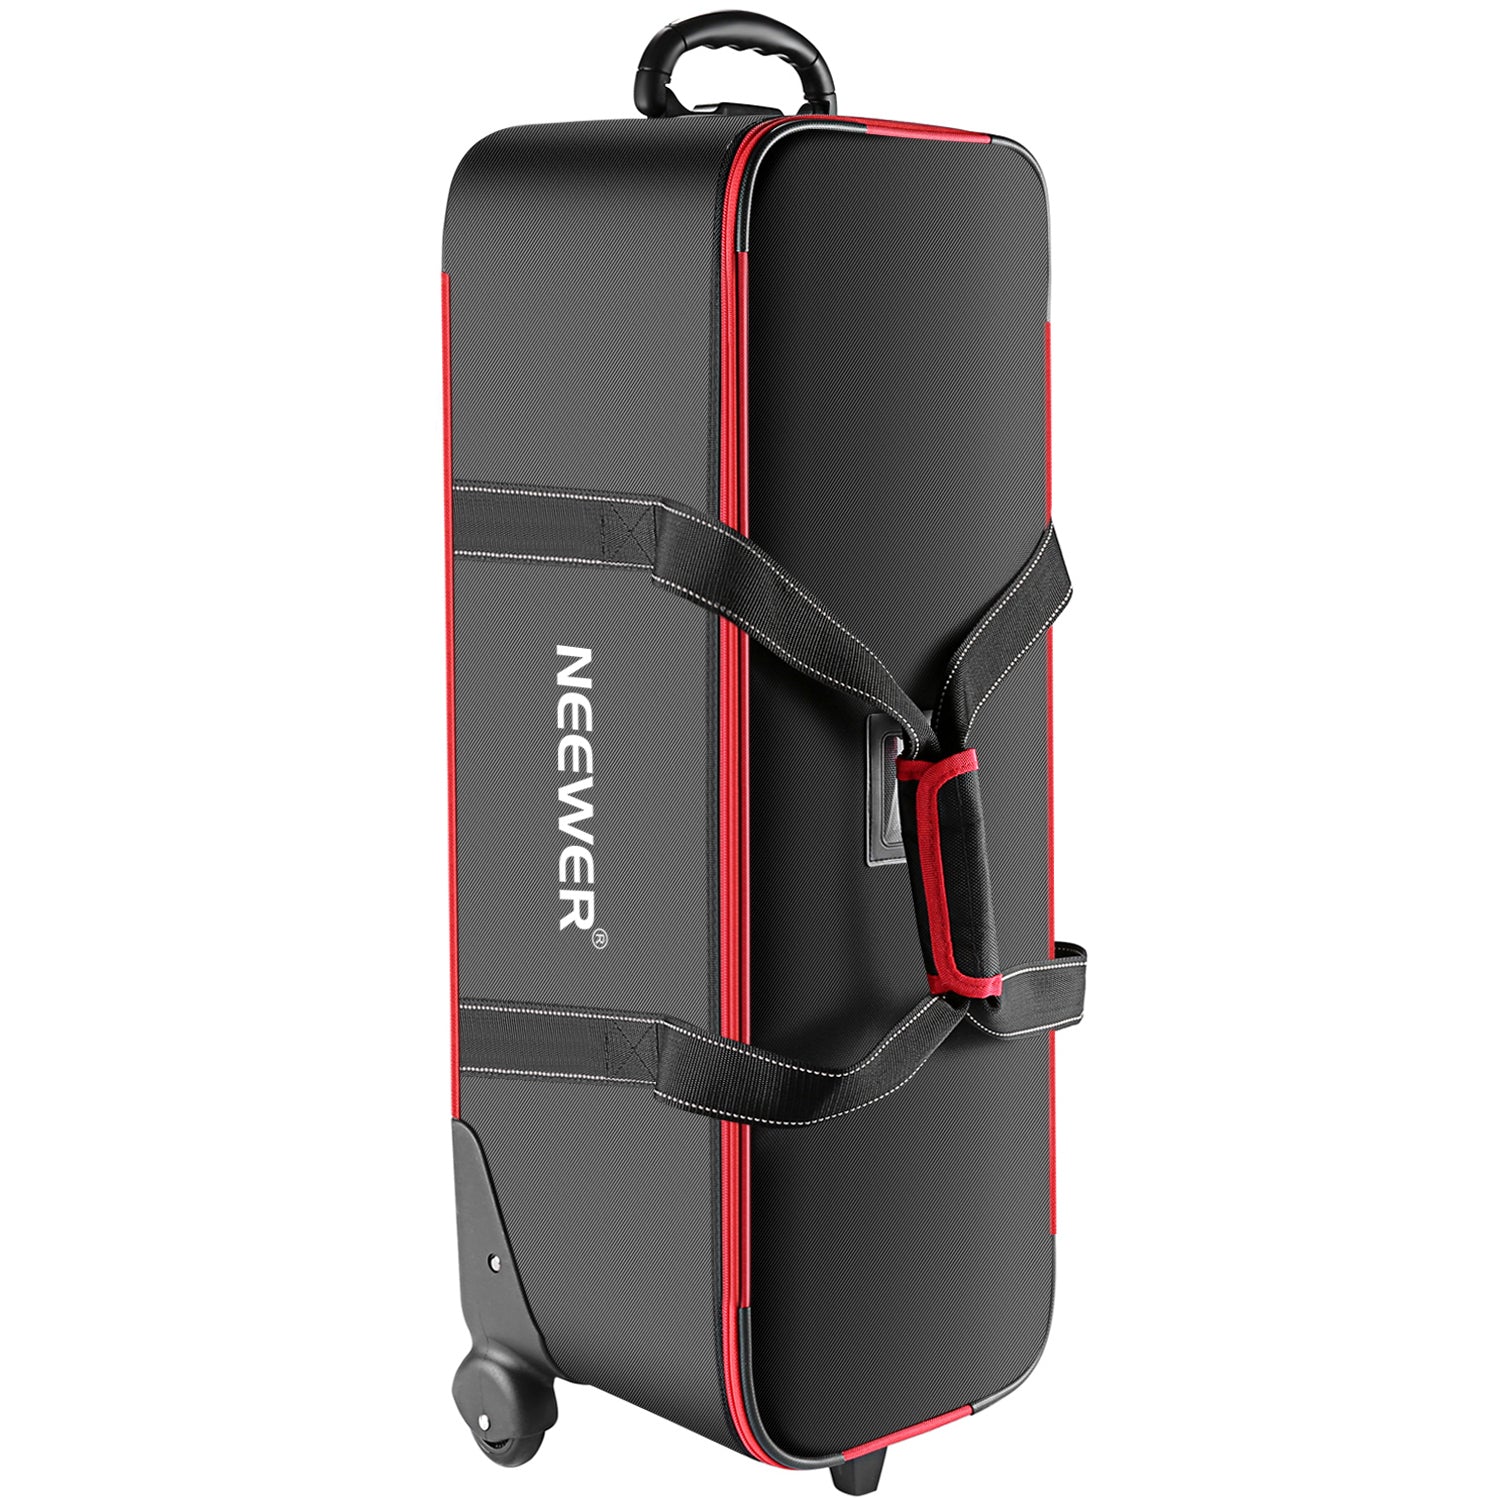 Buy Neewer 2-in-1 Convertible Wheeled Camera Backpack Luggage Trolley Case  with Double Bar, Anti-Shock Detachable Padded Compartment for SLR/DSLR  Cameras, Tripod, Lens and Other Accessories (Black/Red) Online at Low  Prices in India -